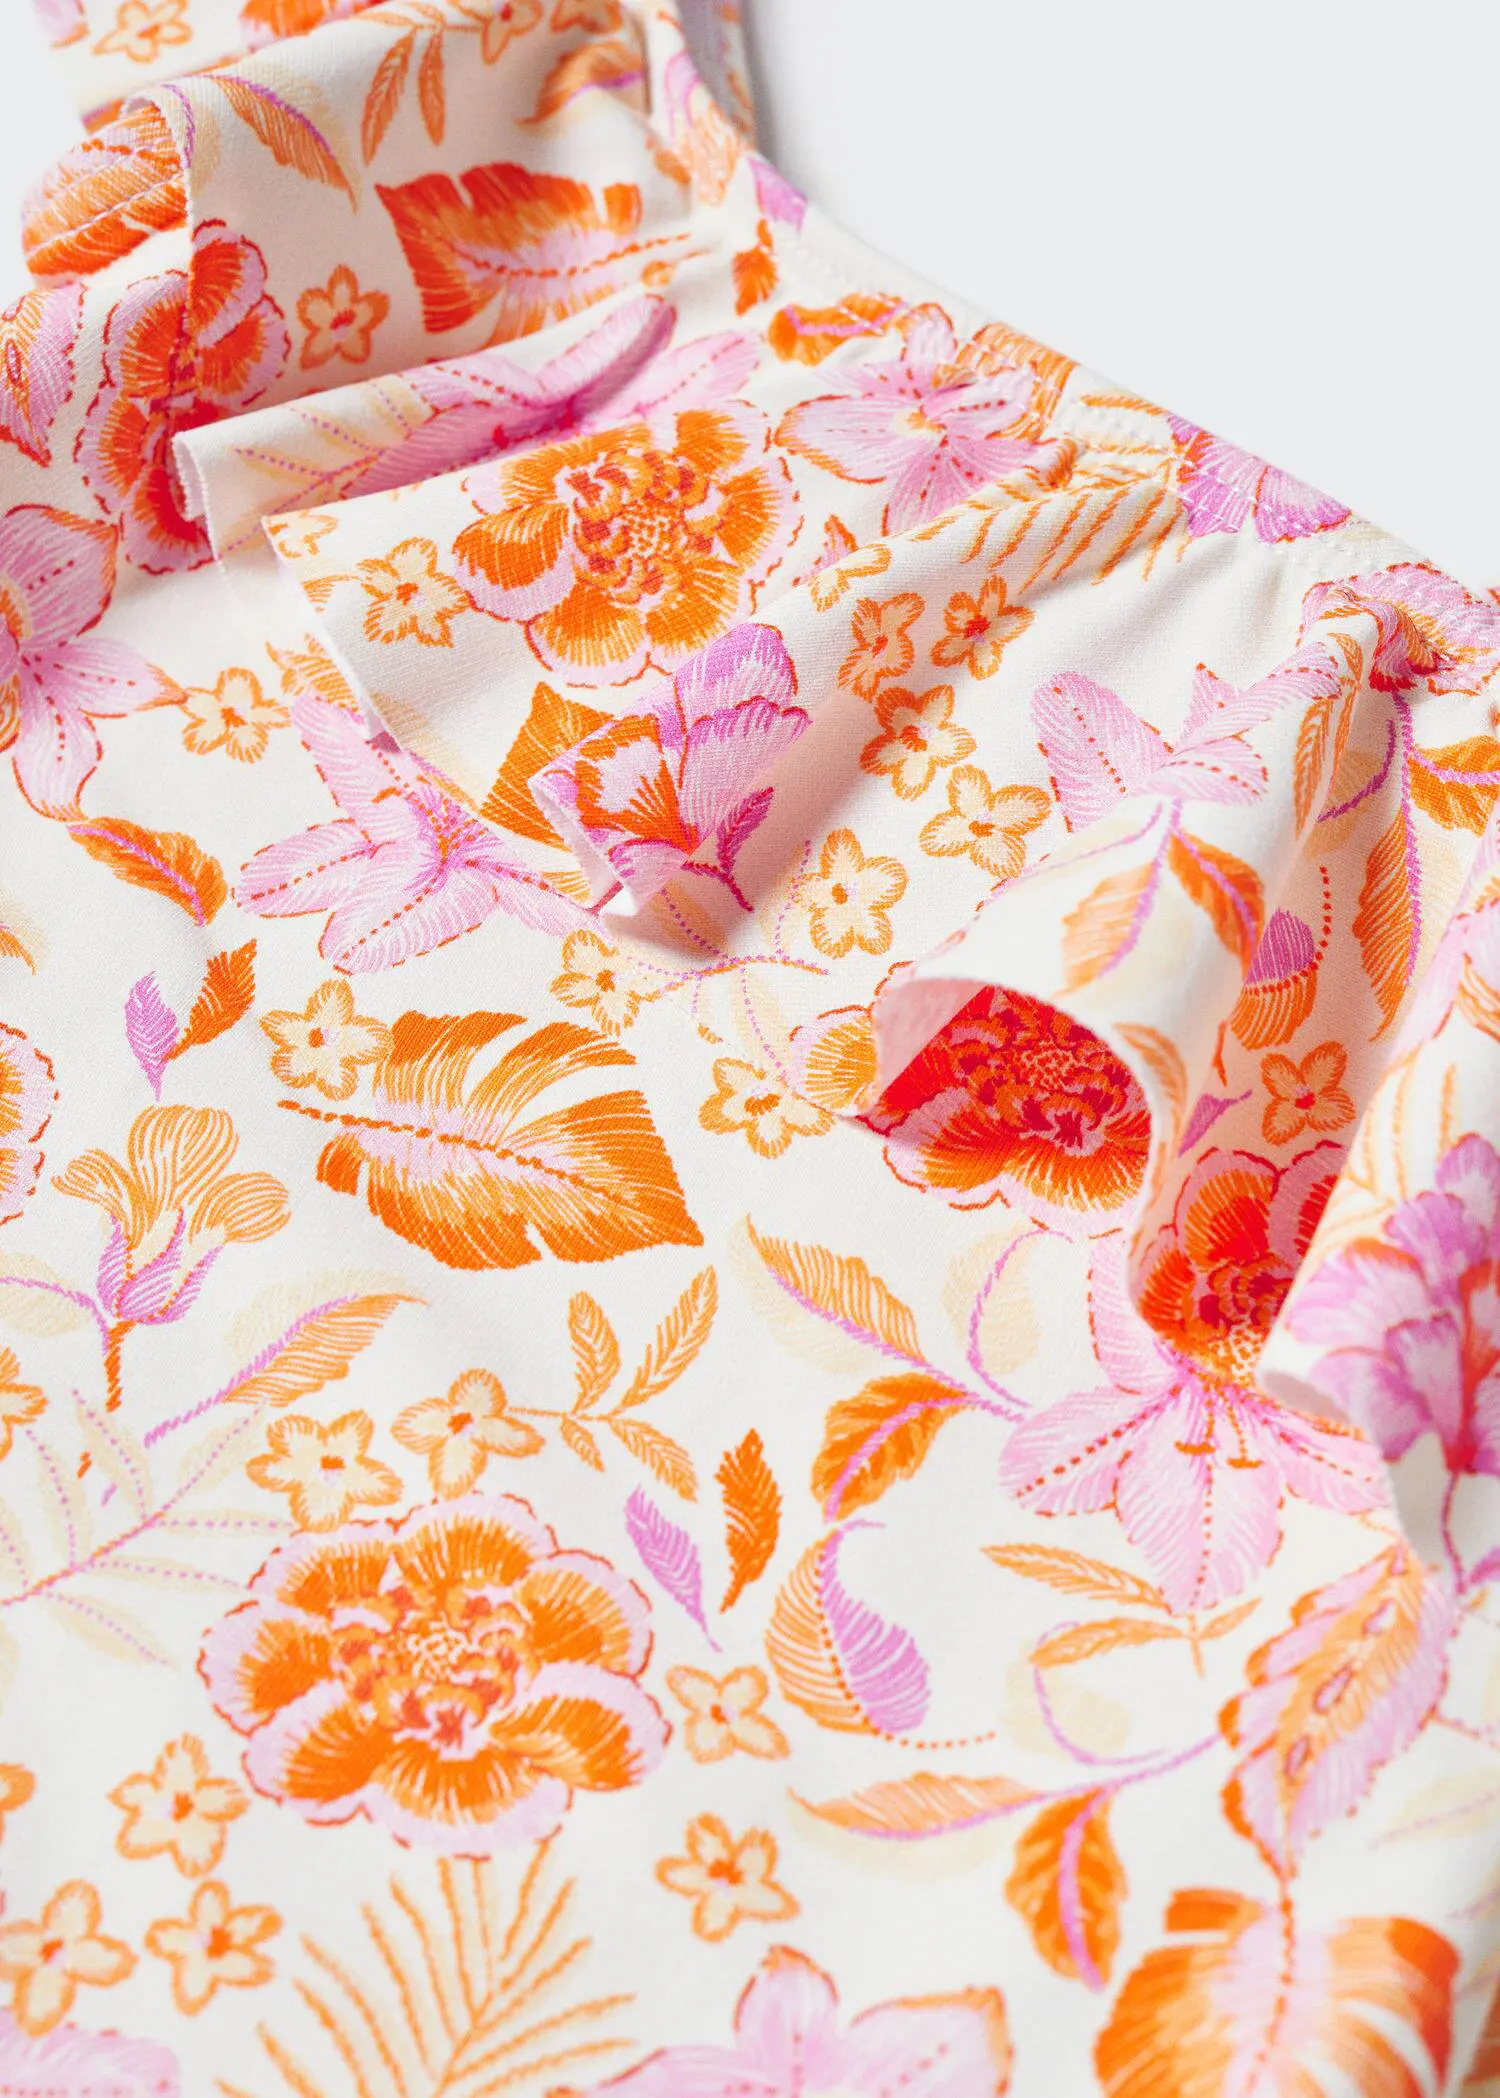 Mango Asymmetrical-print swimsuit. a close-up view of a floral pattern. 